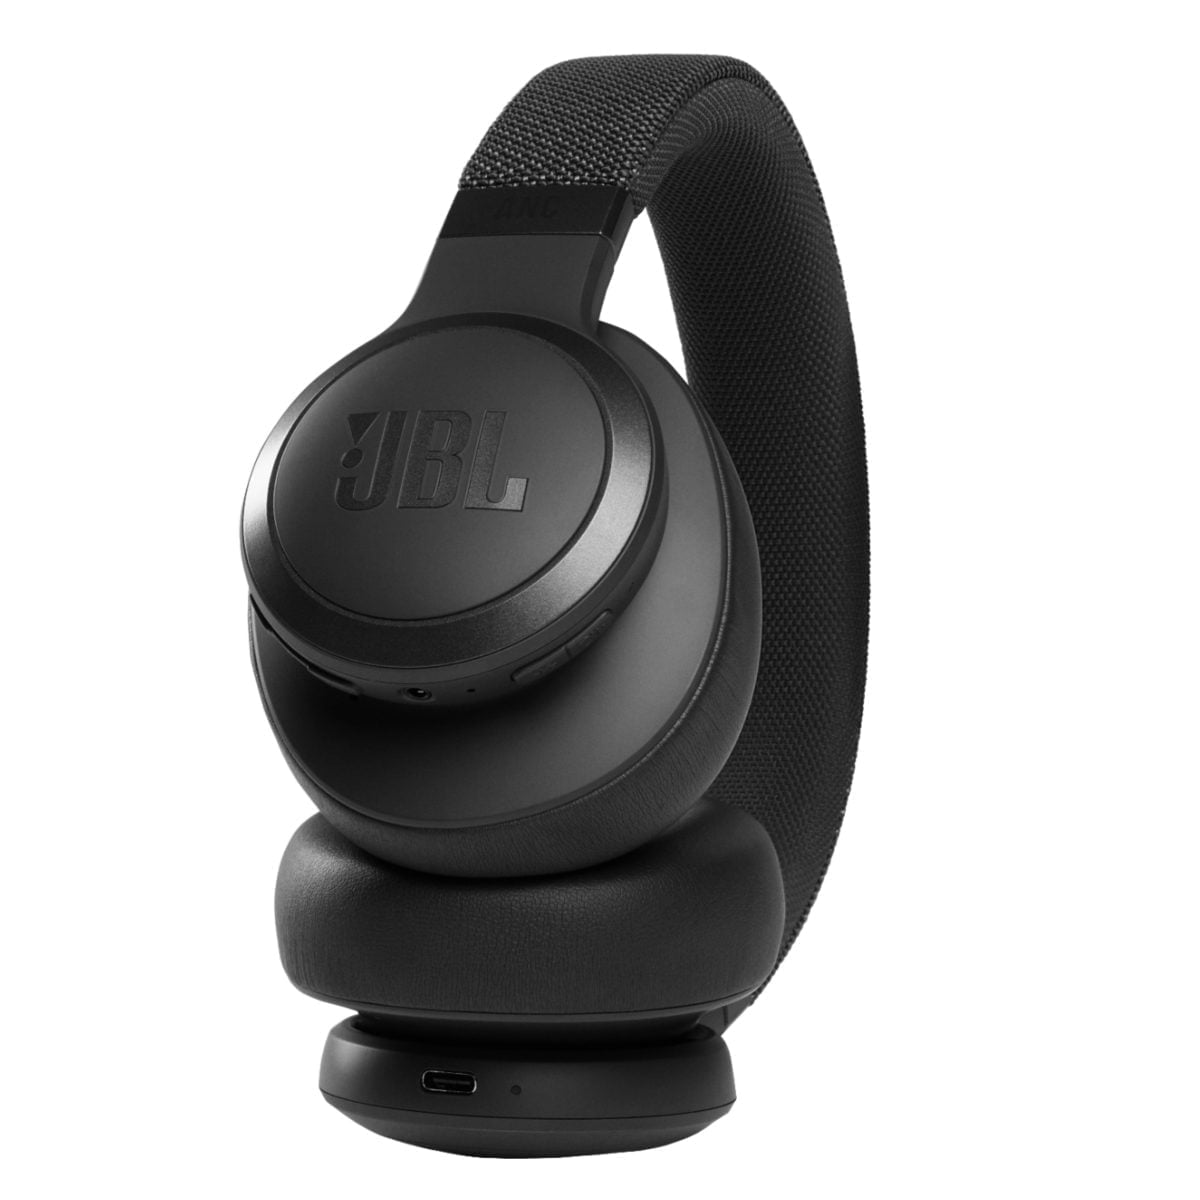 6463749Cv16D Scaled Jbl &Lt;H1&Gt;Jbl Live 660Nc Wireless Noise Cancelling Headphones - Black&Lt;/H1&Gt; Https://Www.youtube.com/Watch?V=Lr2Xbmbdmey In Your World, Music Is Essential, So Slip On A Pair Of Jbl Live 660Nc And Elevate Your Day. Feel The Power Of Jbl Signature Sound Delivered By 40Mm Drivers, Enjoy The Convenience Of Adaptive Noise Cancelling And Smart Ambient Technologies That Allow You To Focus On What Matters For You, And Talk To Your Favorite Voice Assistant With A Tap On The Ear Cup. Rock Out Uninterruptedly For 50 Hours! Jbl Jbl Live 660Nc Wireless Noise Cancelling Headphones - Black